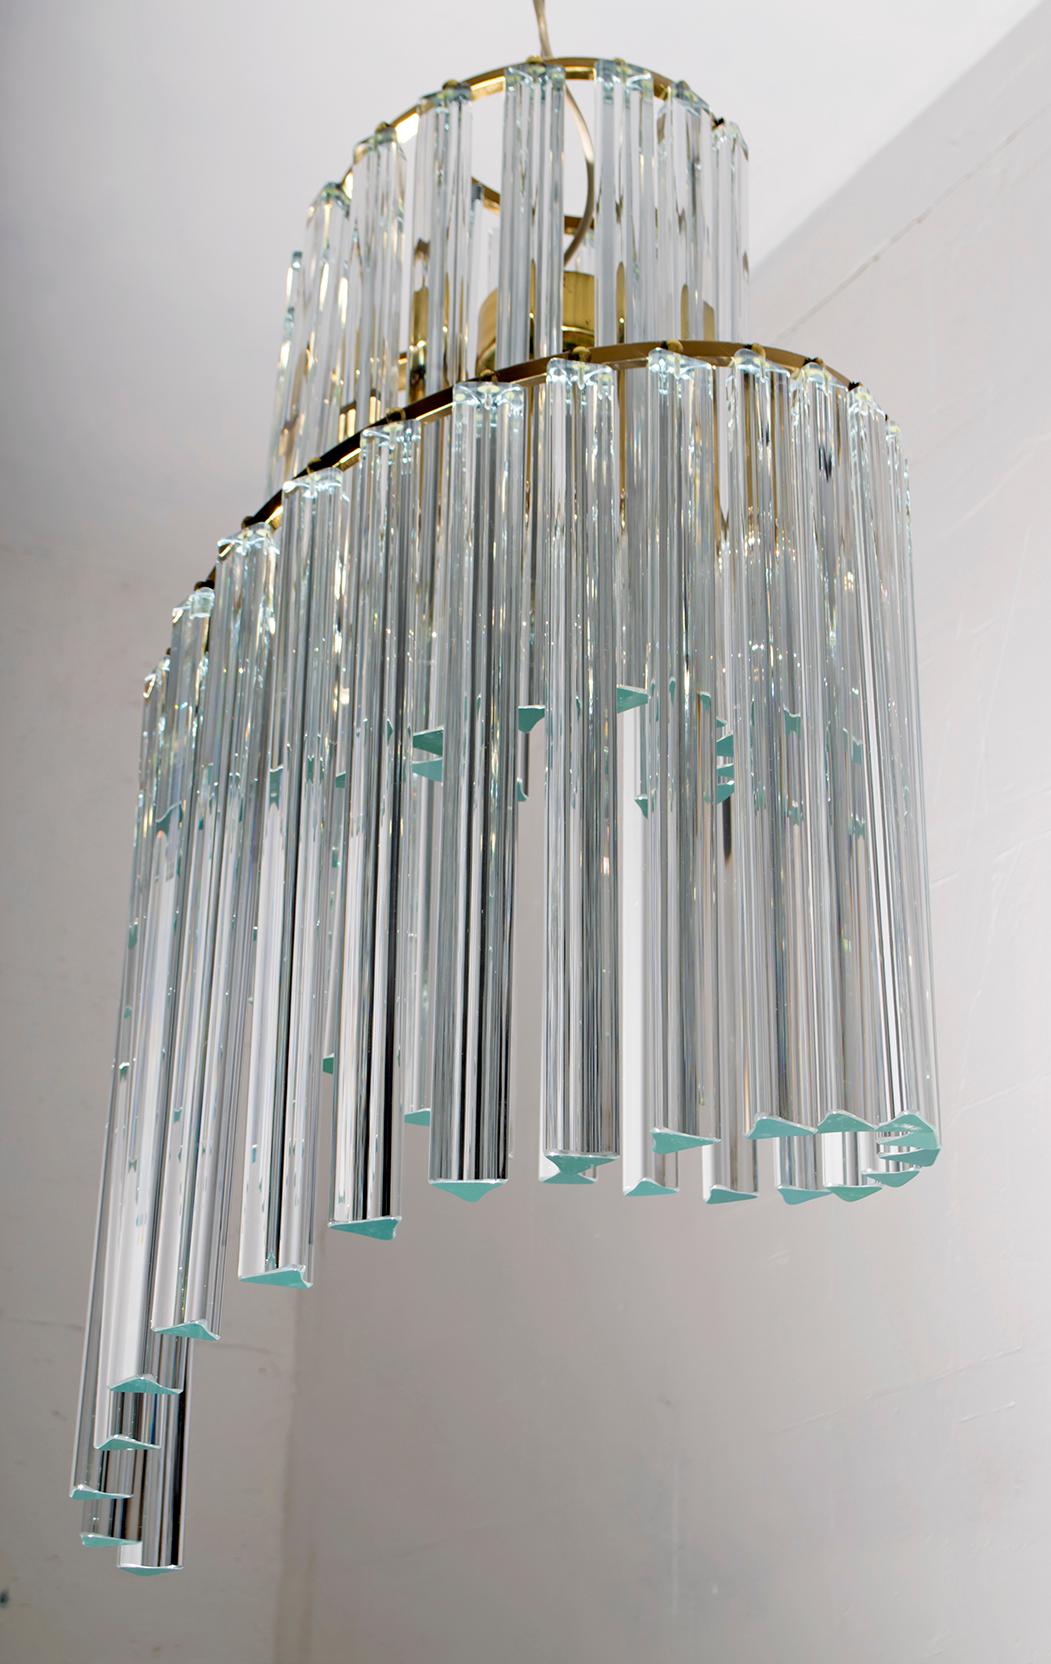 This chandelier was designed by the famous Italian designer Pia Guidetti Crippa for the Lumi Milano company, is composed of 41 Murried glass Triedri with a length of 41 cm, was produced in the 1970s, has a spiral shape and a structure in golden